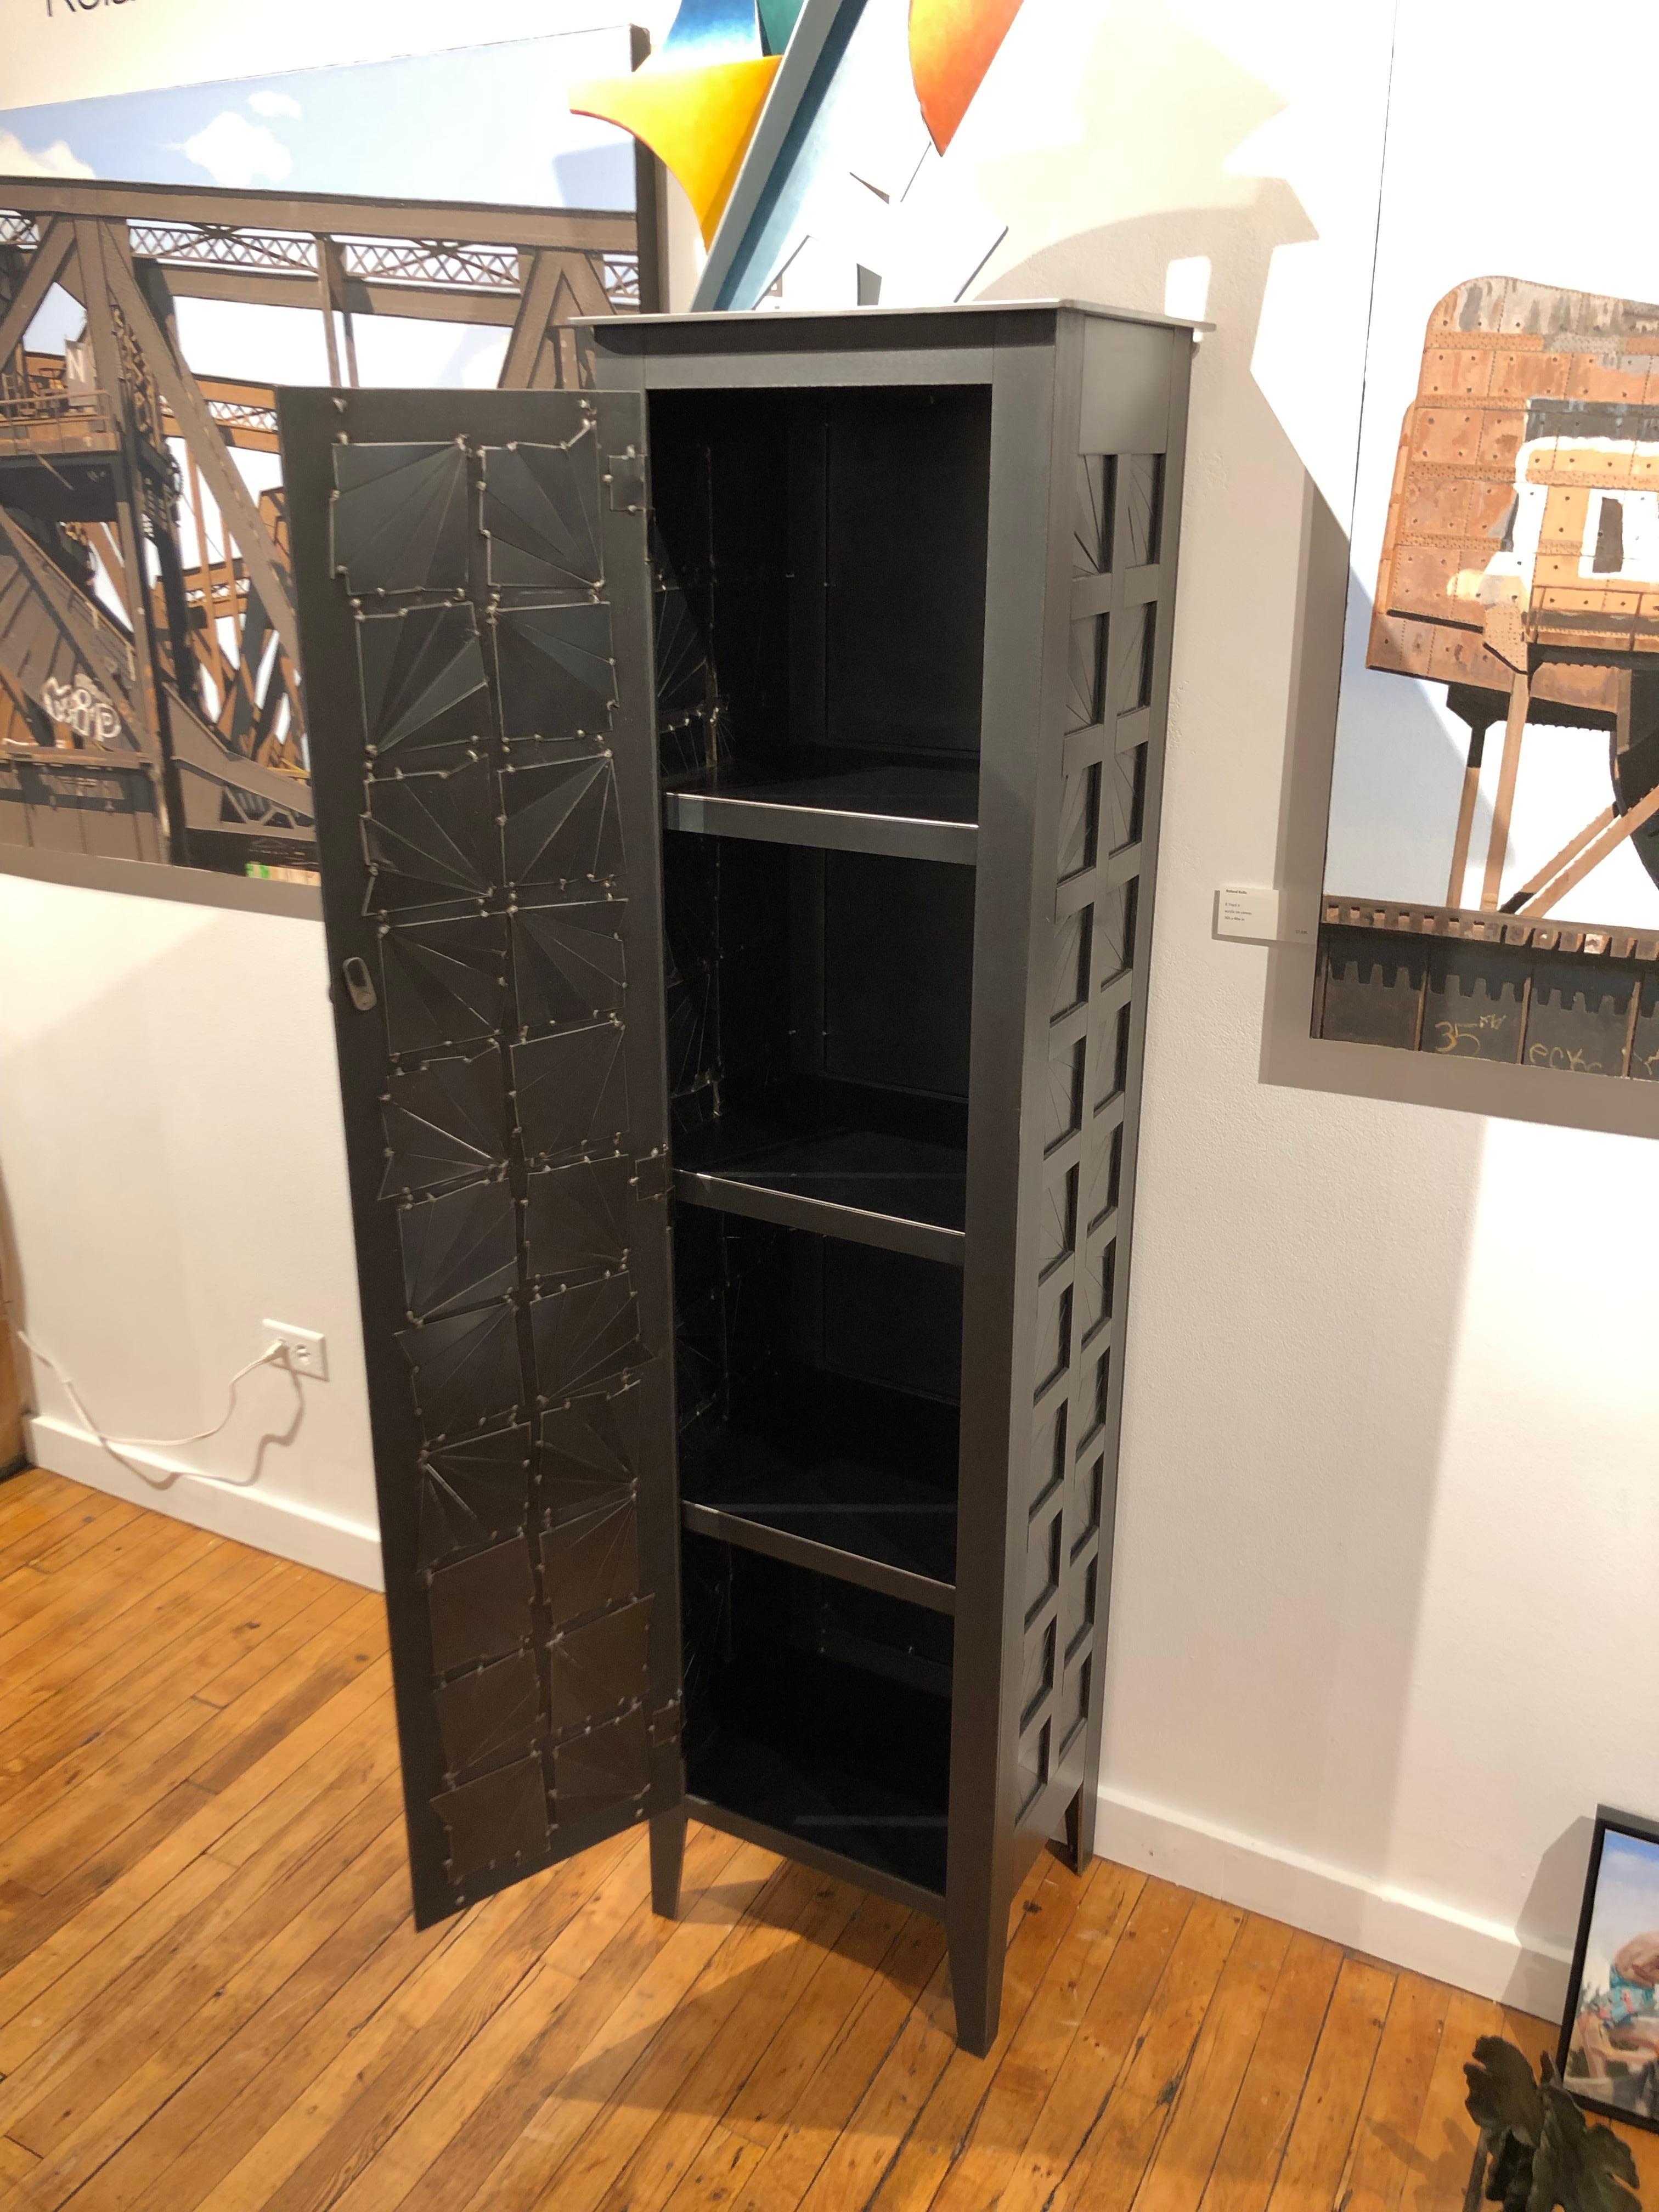 This is a totally functional tall one door cupboard. It created from hot-rolled steel panels. The panels on the door front and sides are made from welded pieces of steel arranged in a fractured starburst quilt pattern. The pattern is inspired by the